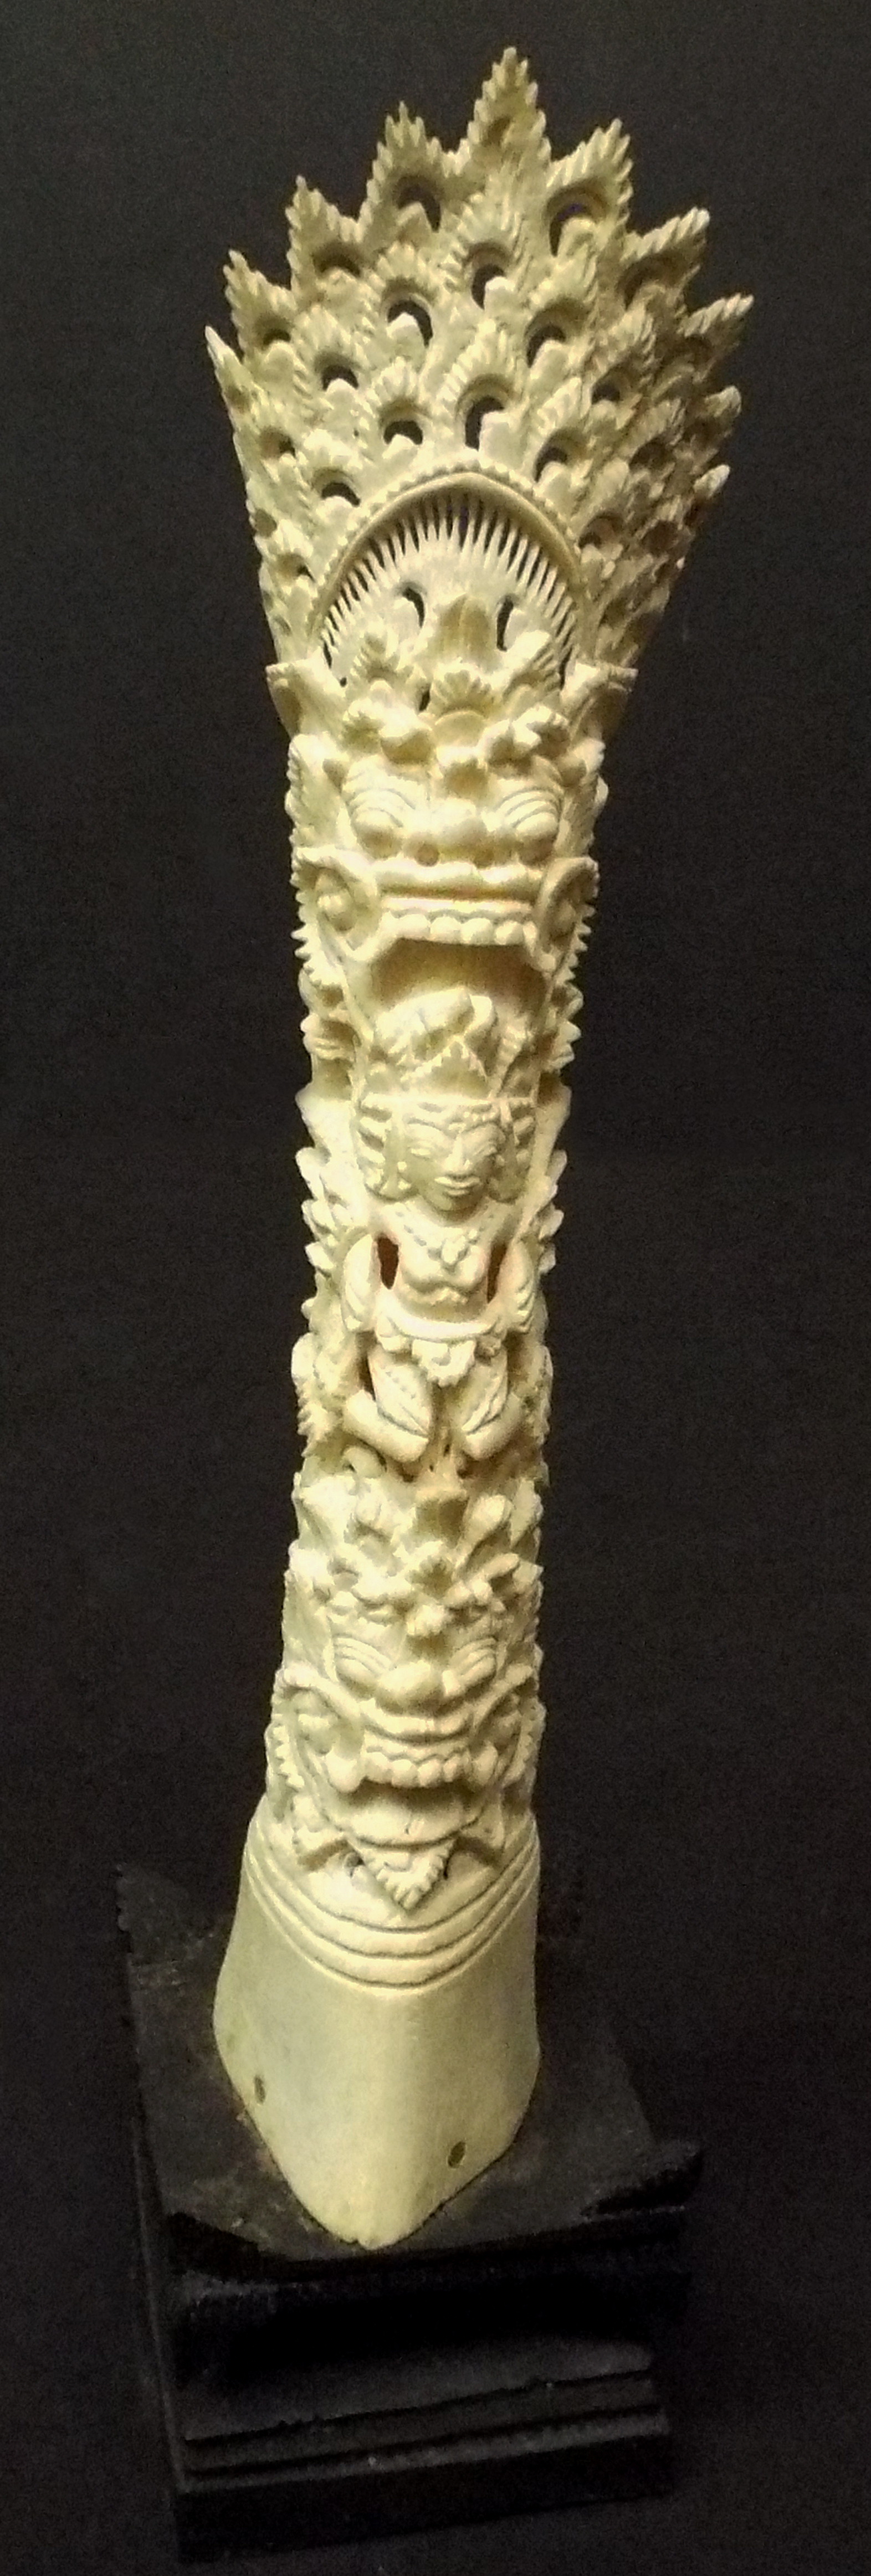 CARVING AND SCULPTURE BY BALI BONE CRAFT